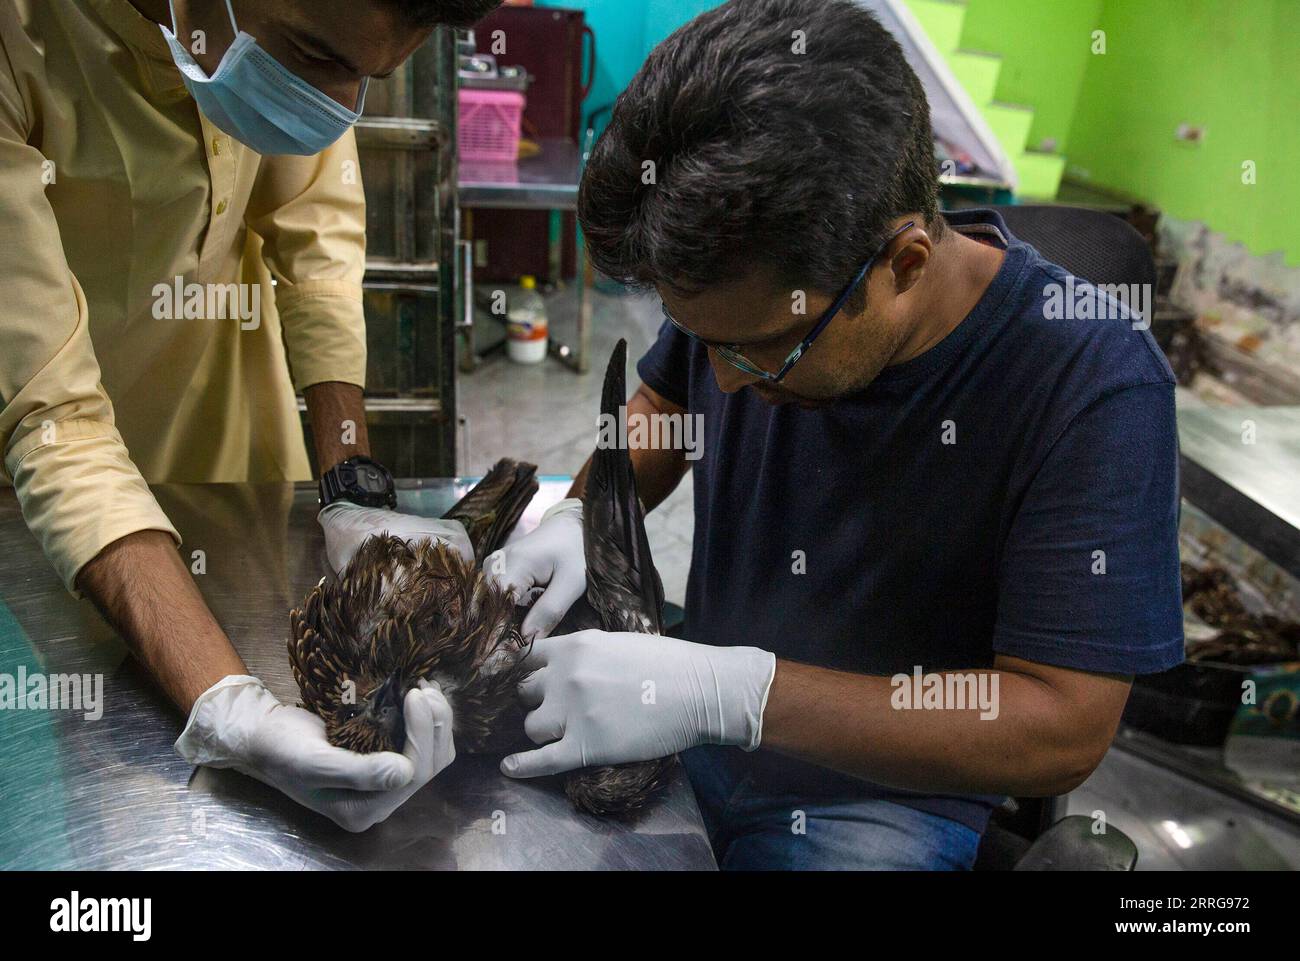 220514 -- NEW DELHI, May 14, 2022 -- Raptor rescuers treat an injured black kite at their clinic in New Delhi, India, May 13, 2022. Two brothers -Saud and Shehzad -in New Delhi have embarked on the mission to save injured raptors. They have been treating the injured birds at their clinic in Wazirabad, New Delhi. Last year they say they saved 2500 birds and since the beginning of this year over 1300 birds have been treated at their clinic. Photo by /Xinhua INDIA-NEW DELHI-BIRD RESCUERS JavedxDar PUBLICATIONxNOTxINxCHN Stock Photo